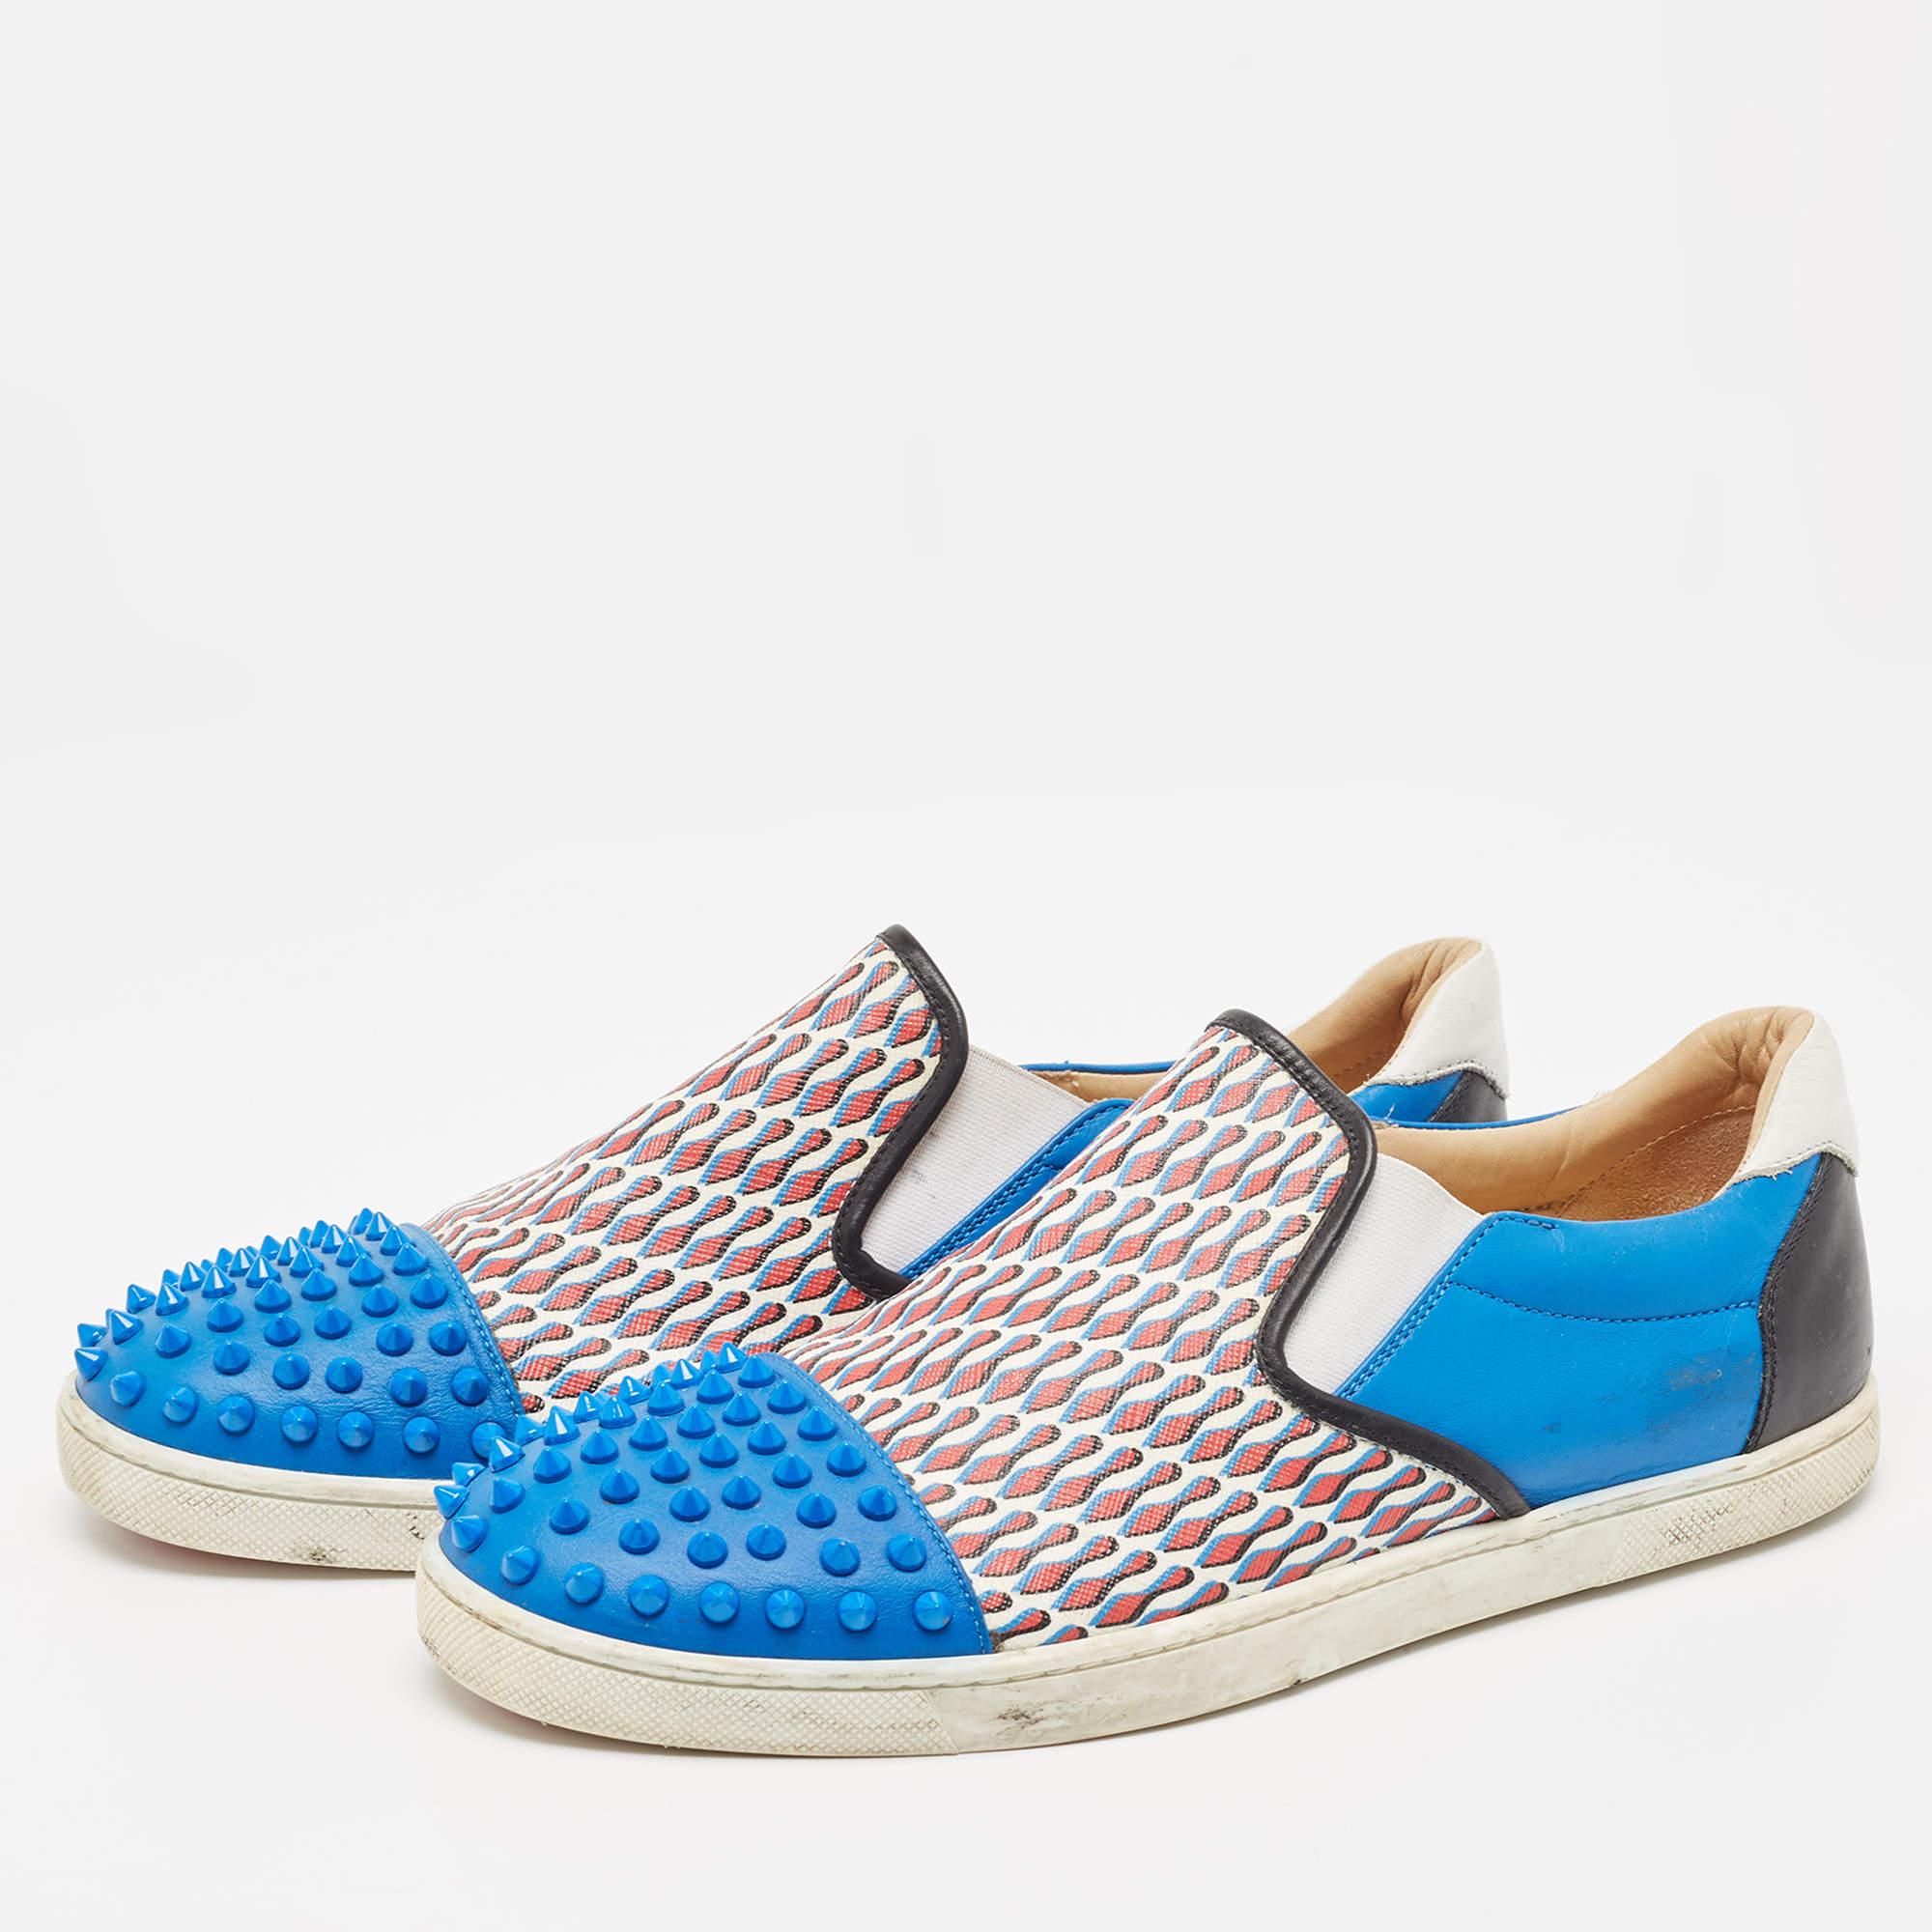 Designed in the most stunning bright and beautiful blue leather and Loubi print leather, these Nazapunta skate sneakers from Christian Louboutin are stylish and definitely a statement piece. Featuring blue spikes across the vamps, these shoes are